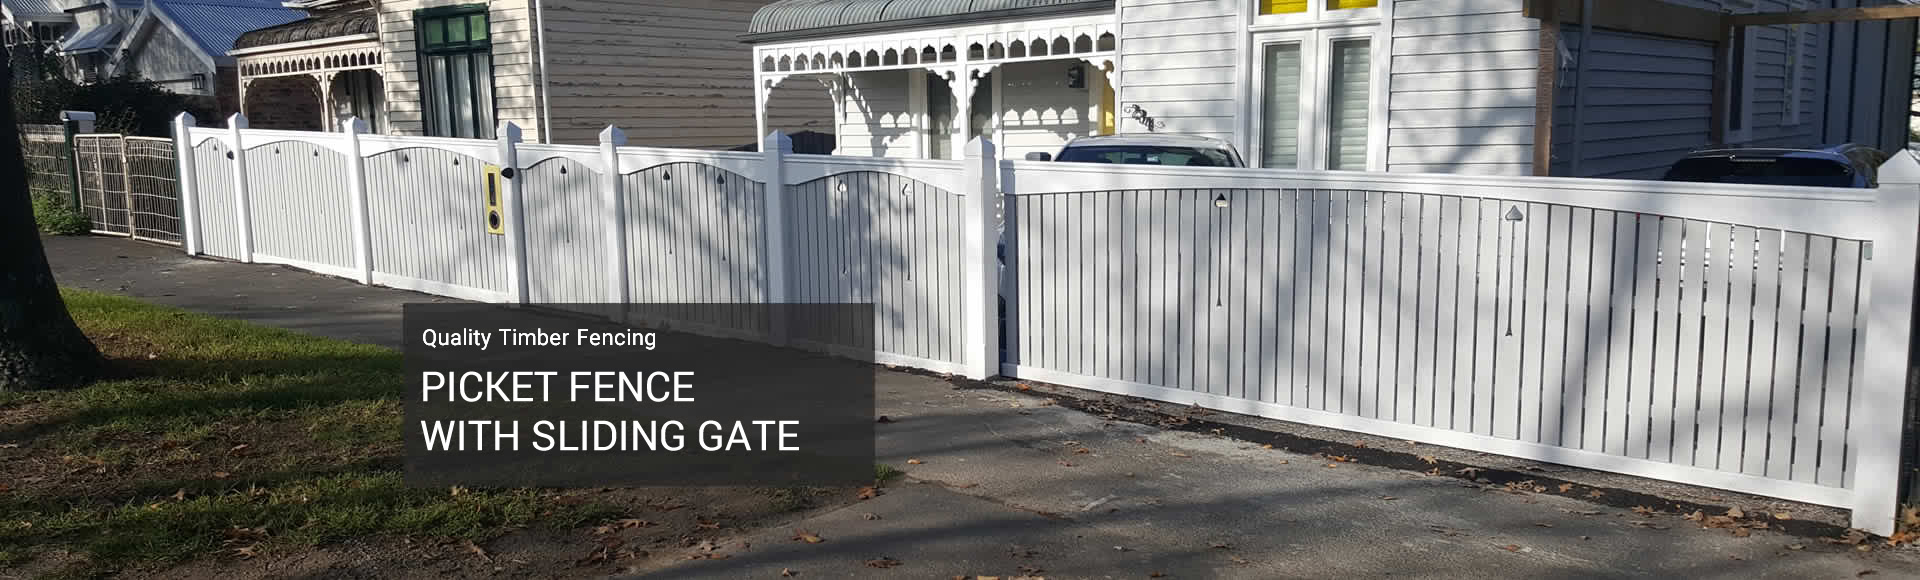 picket fence with sliding gate